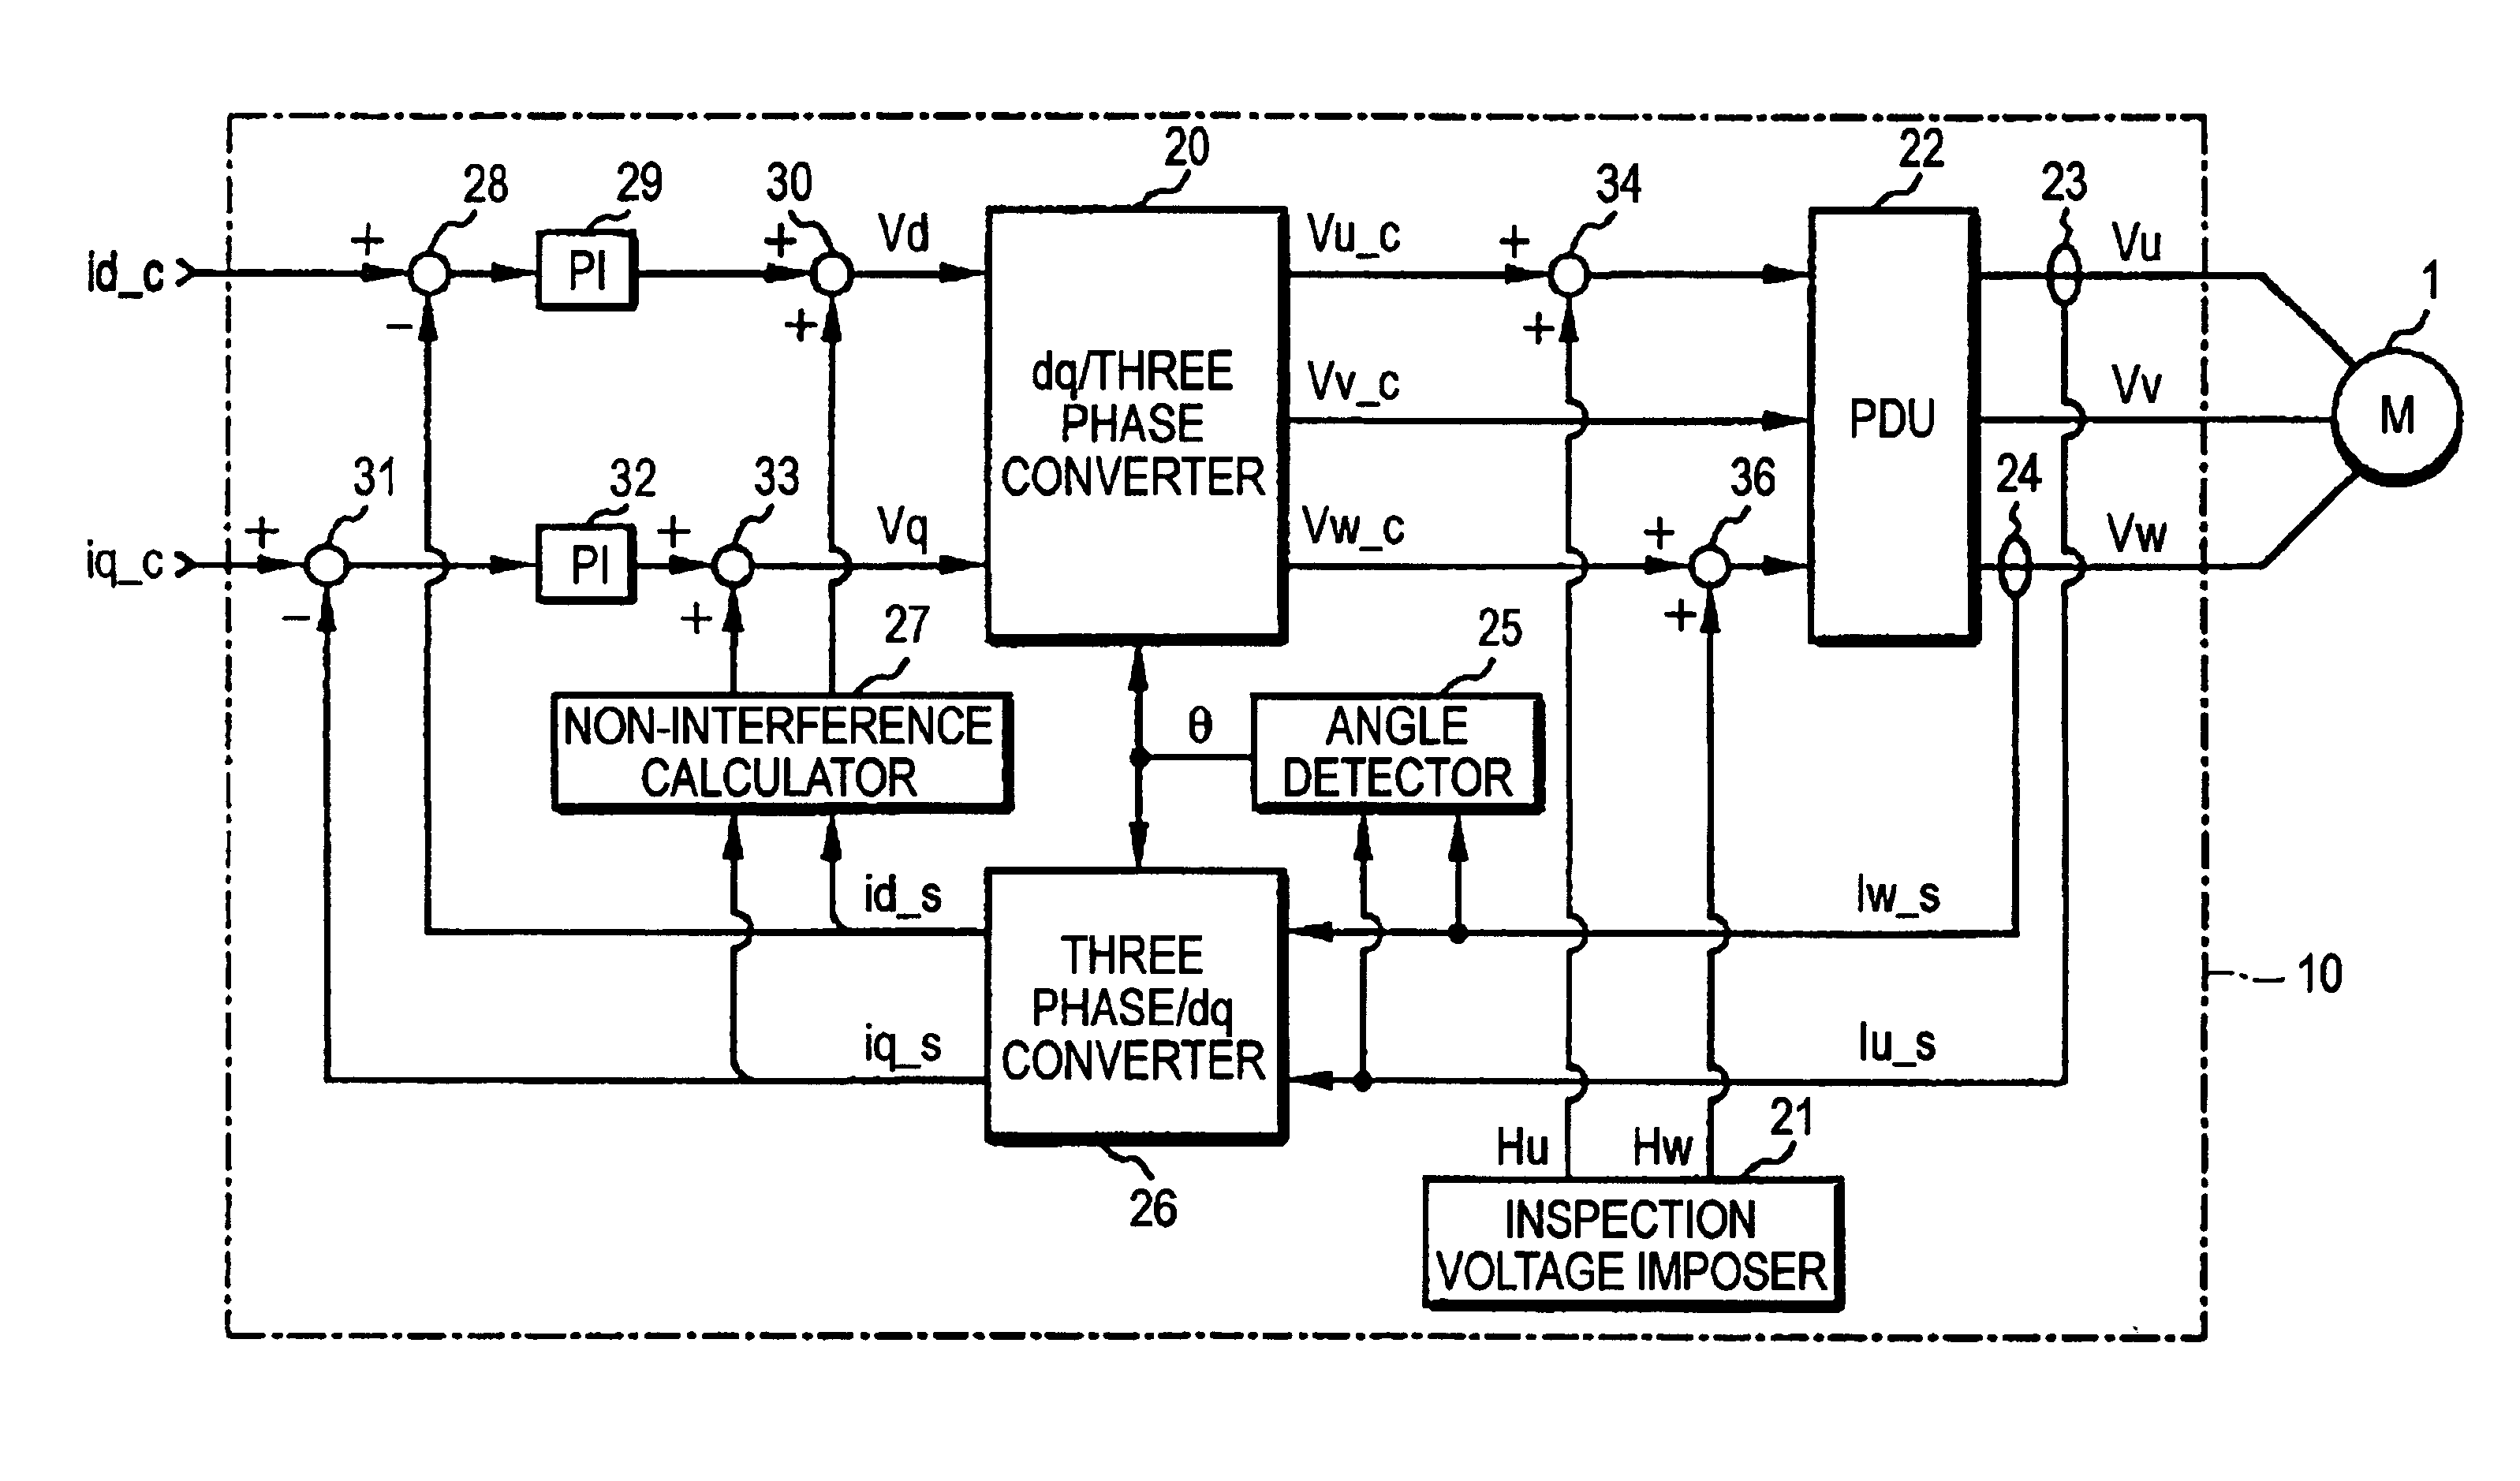 Rotor angle detecting apparatus for DC brushless motor